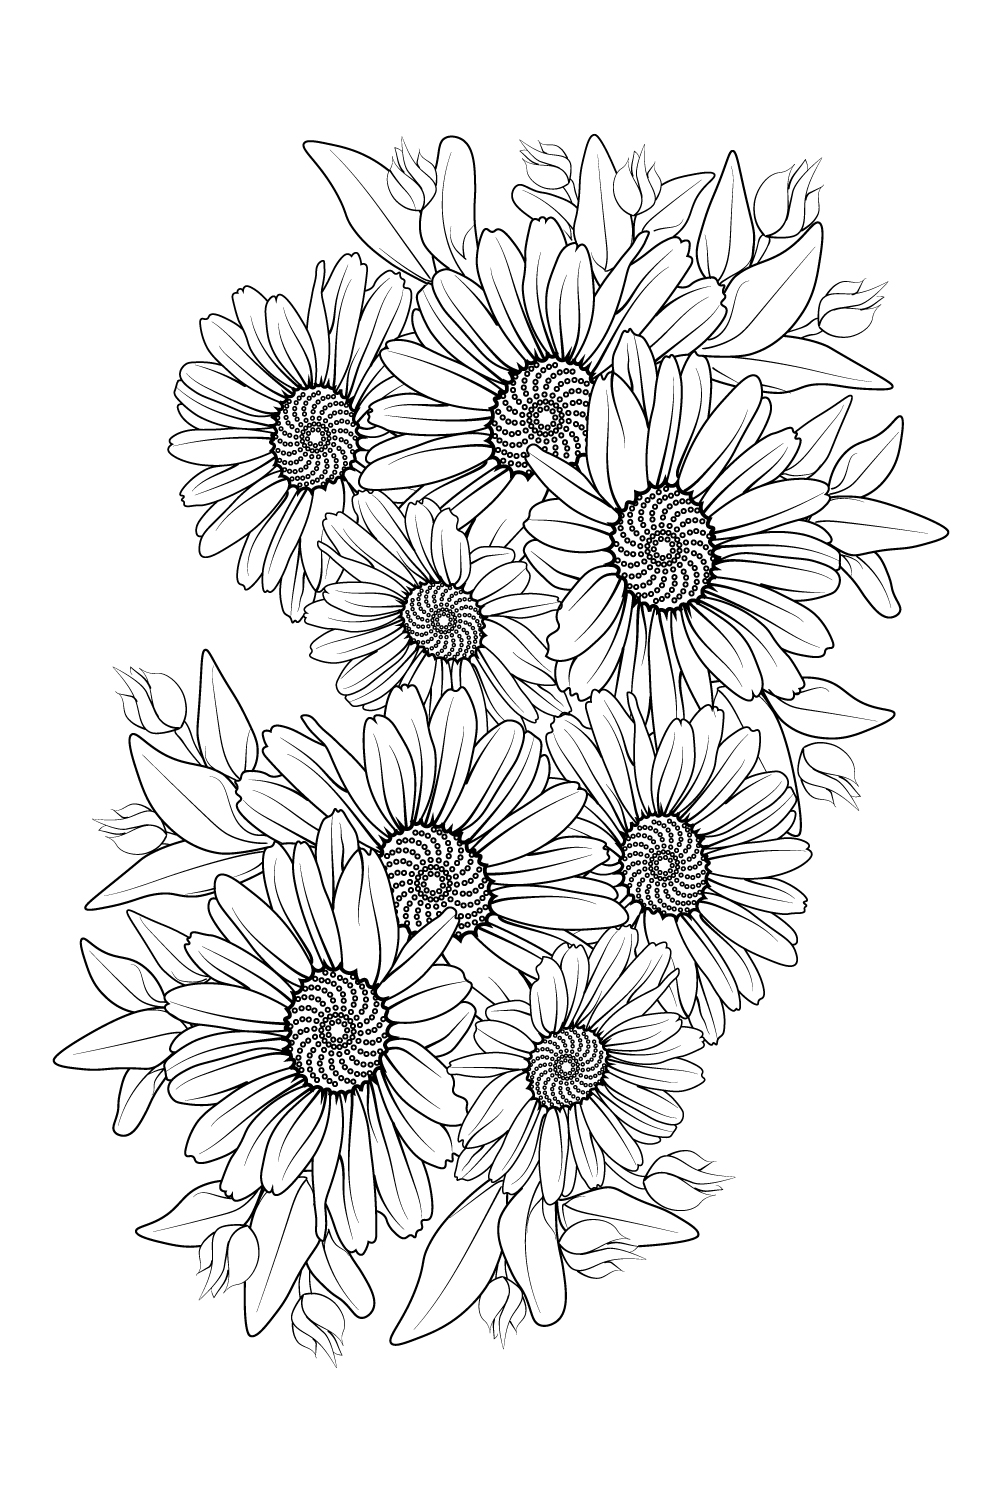 Daisy flower coloring pages daisy flower bouquet tattoo small daisy tattoo